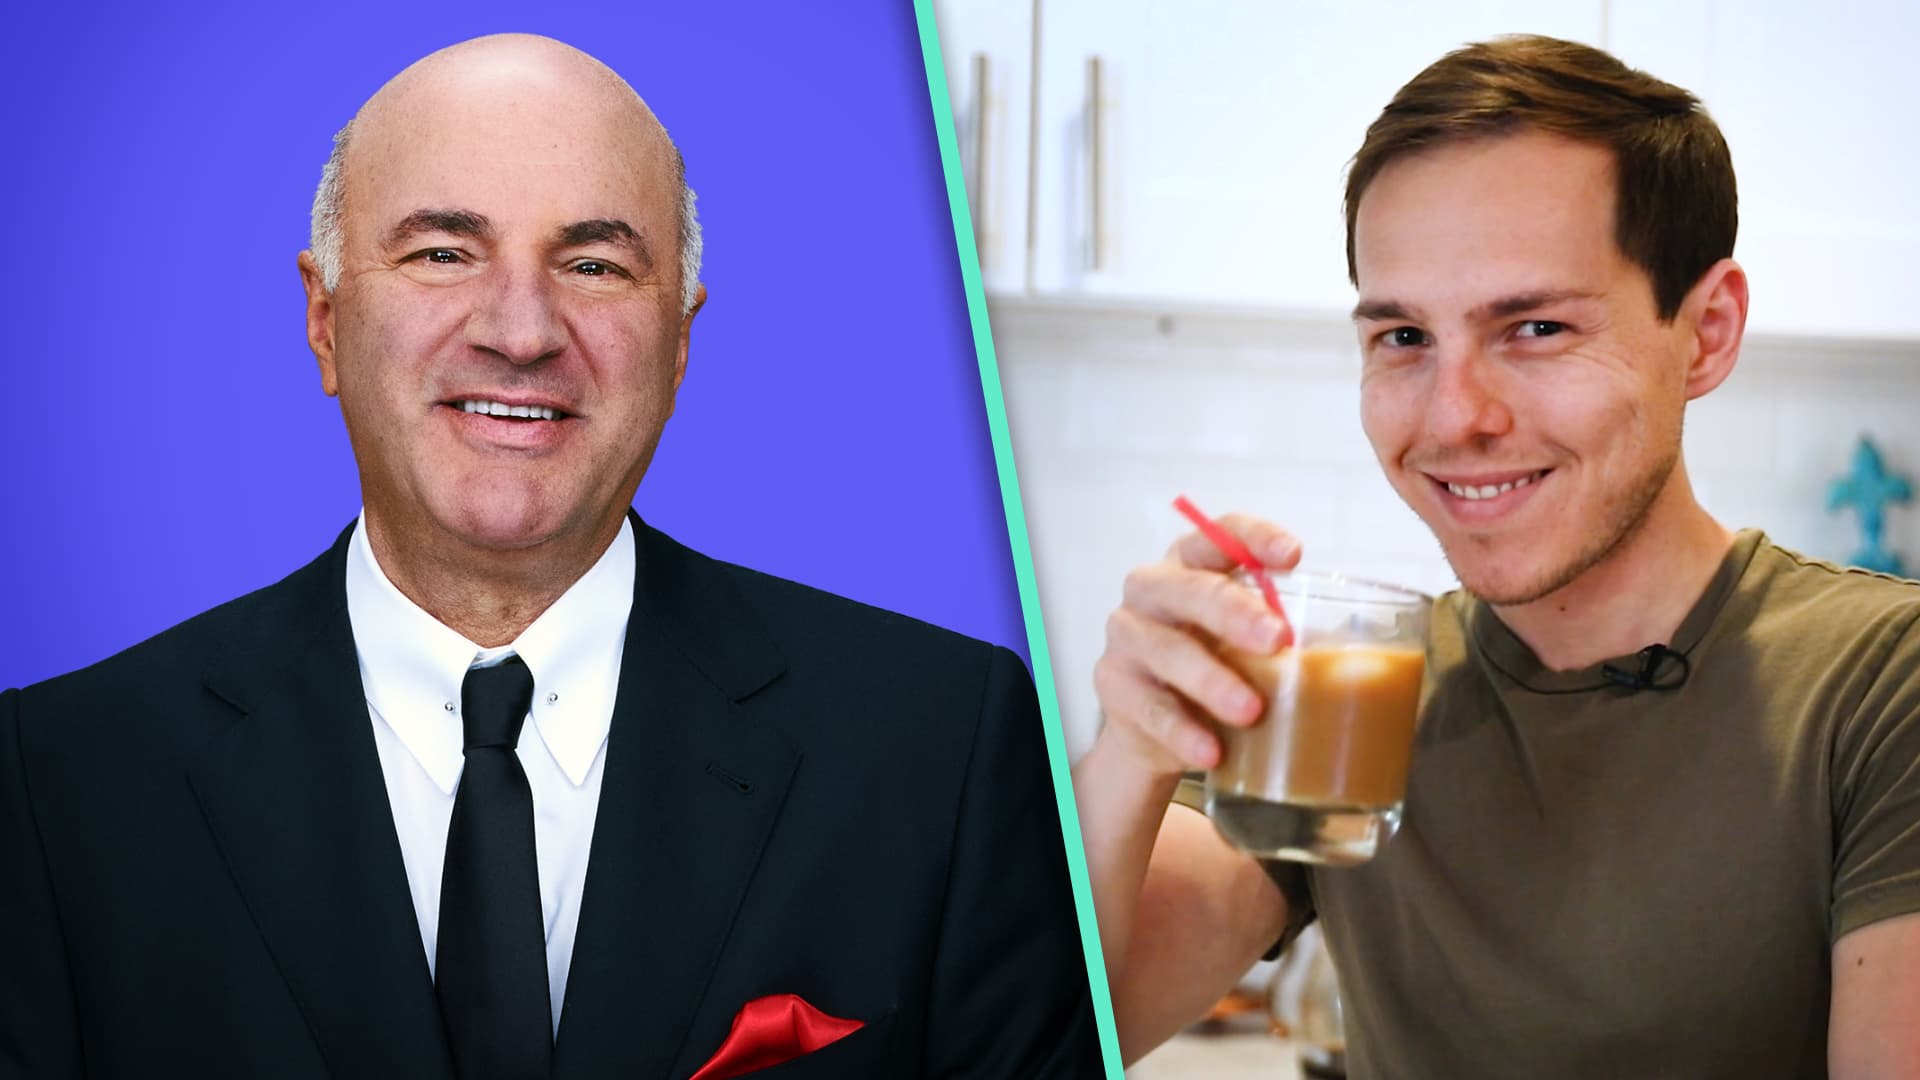 Kevin O'Leary reacts to a 30-year-old YouTube millionaire who refuses to spend money on coffee